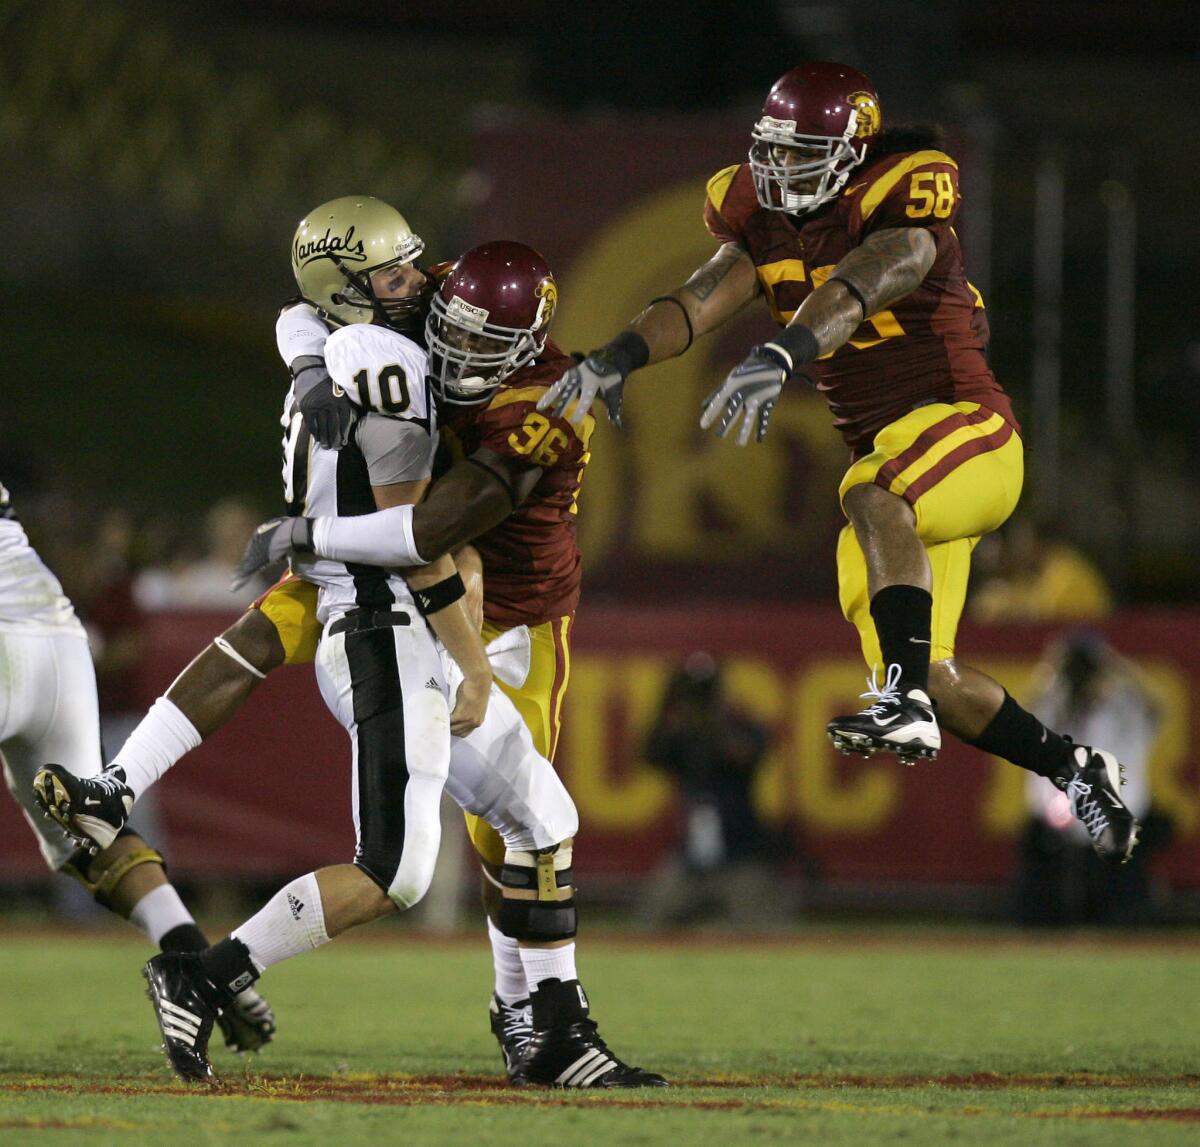 After throwing a pass, Idaho quarterback Nathan Enderle is hit by USC defensive lineman Lawrence Jackson as linebacker Rey Maualuga helps defend during the first half Sept. 1, 2007. USC won 38–10.